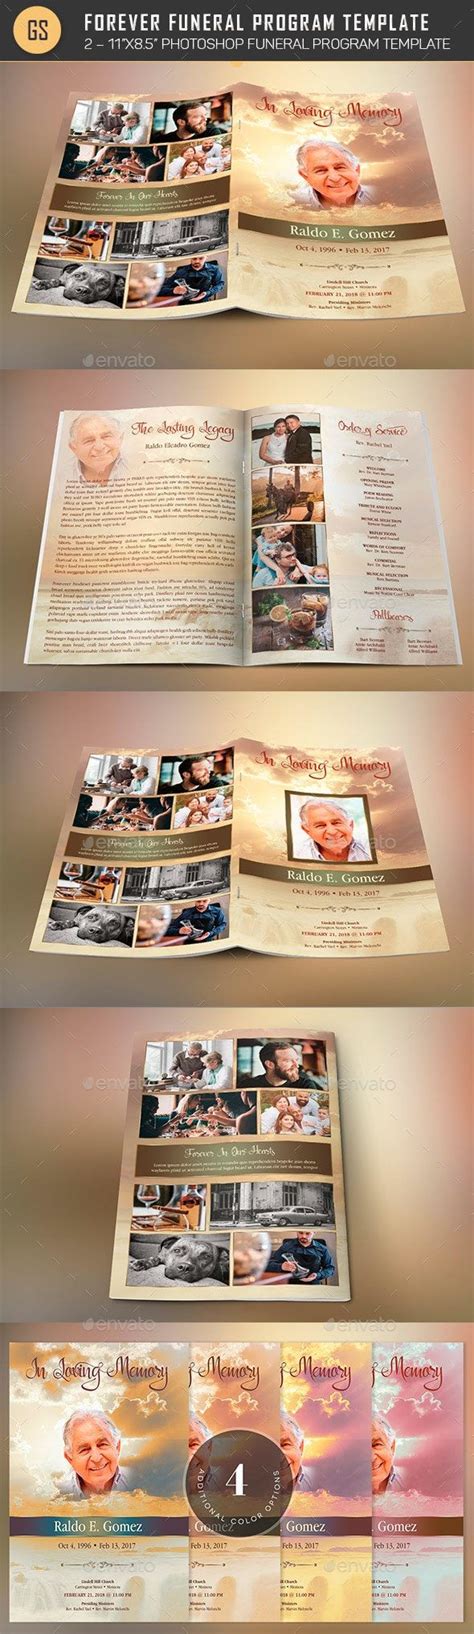 Forever Funeral Program Template Funeral Program Template Funeral